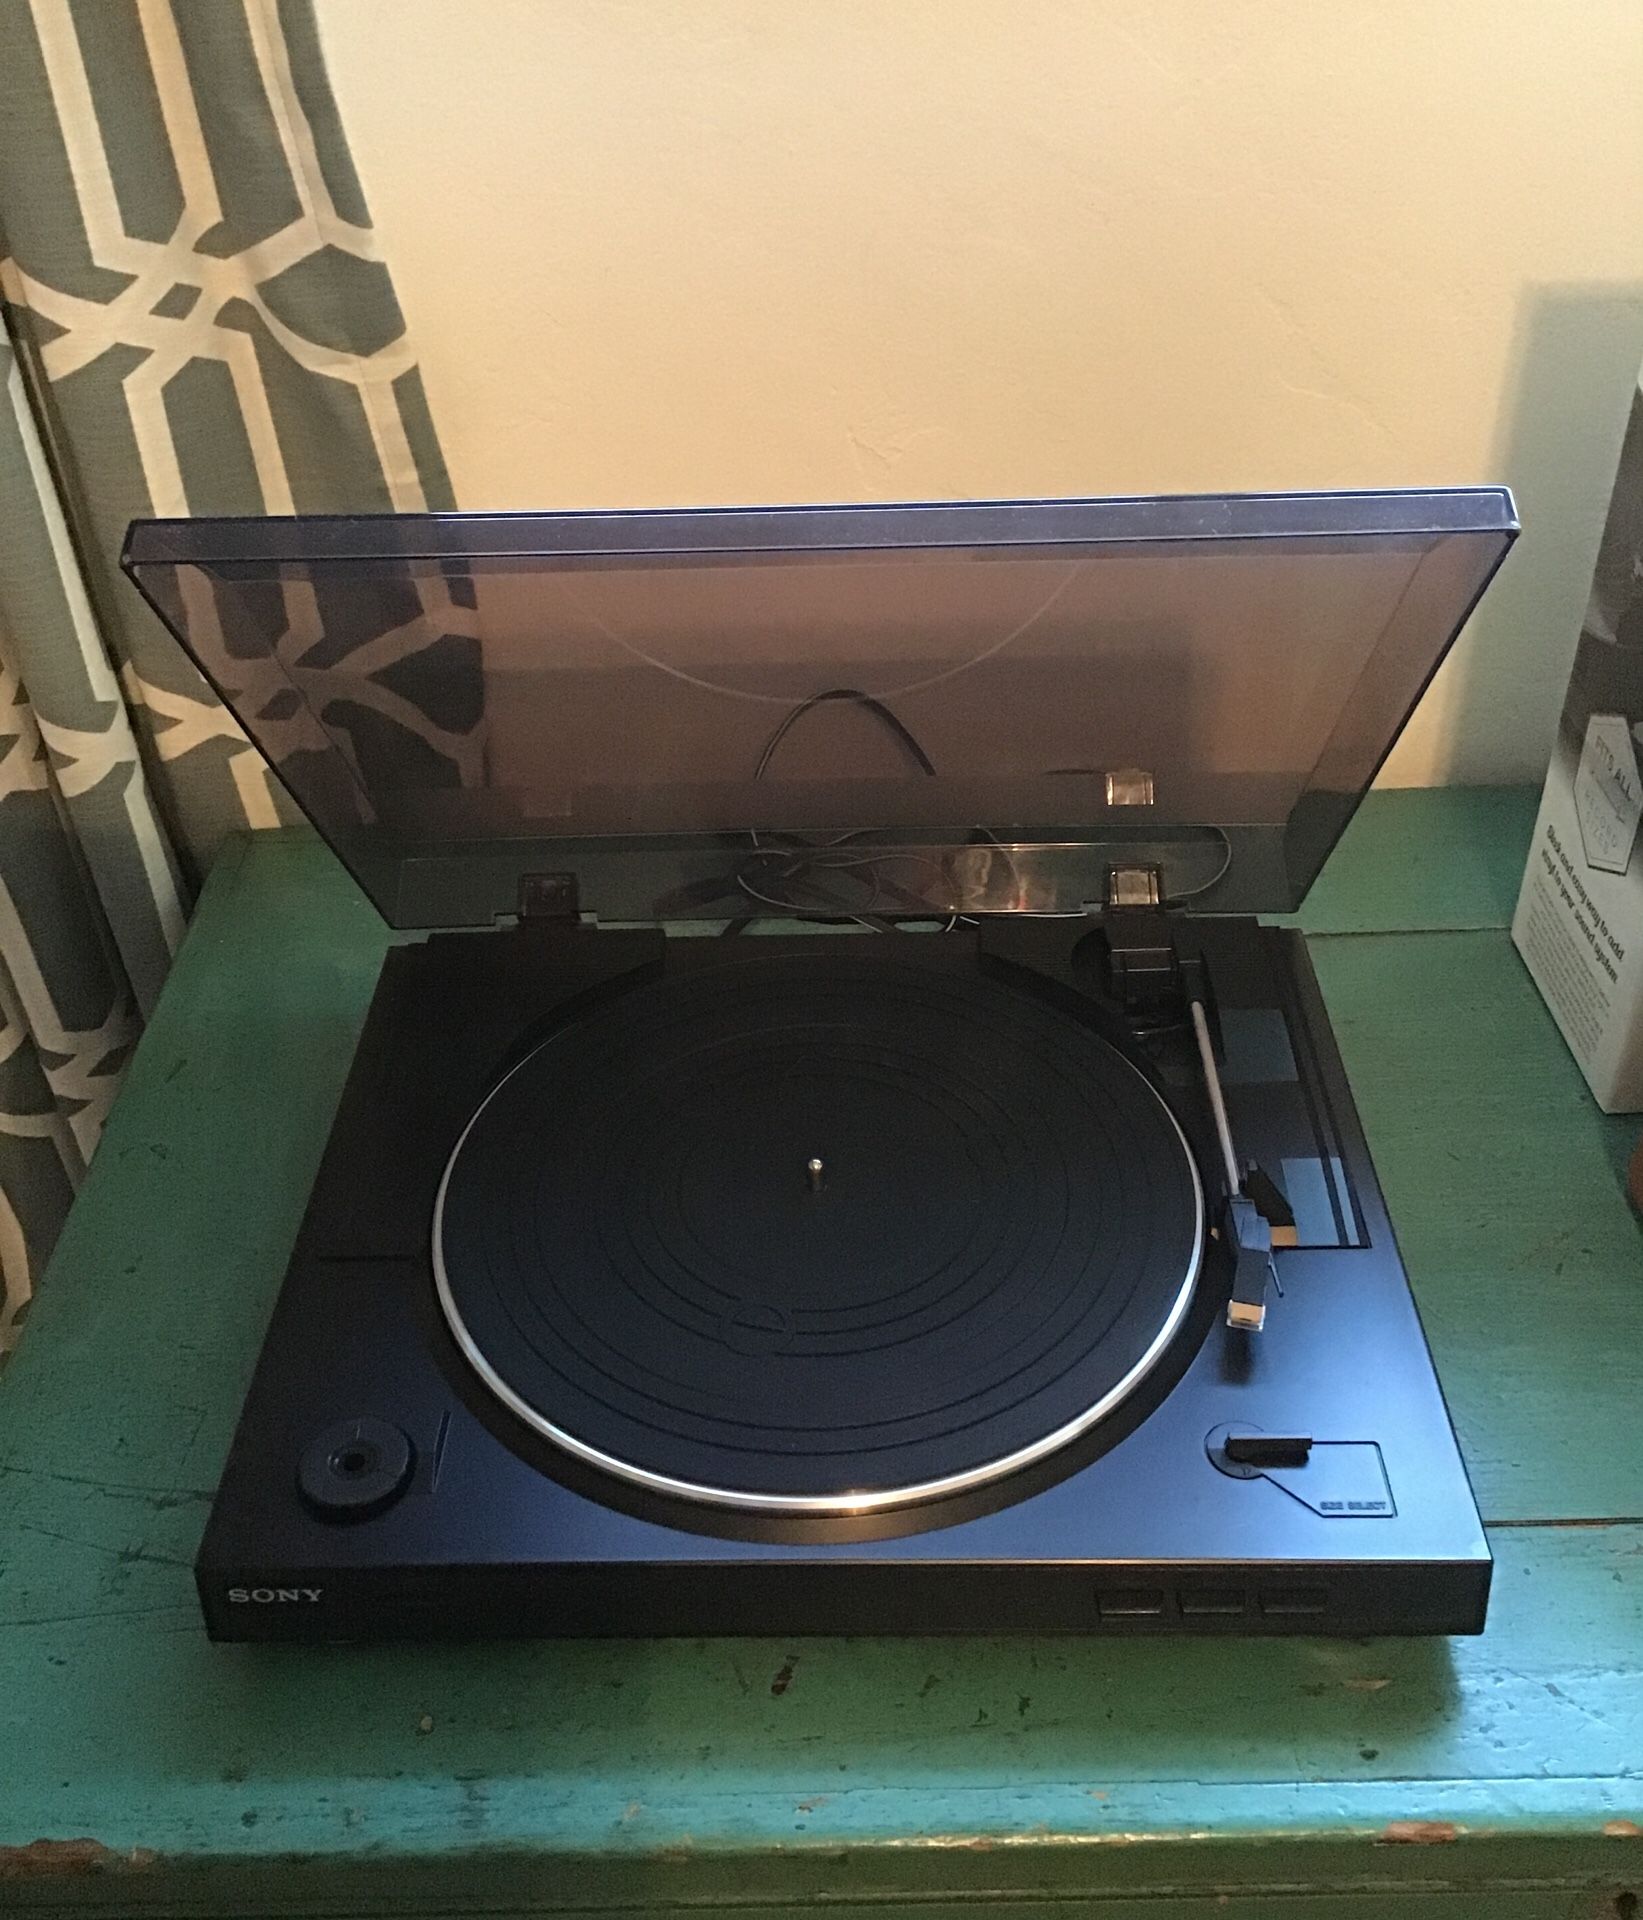 Sony Stereo Turntable System PS-LX300USB vinyl records 33rpm/45rpm. $30